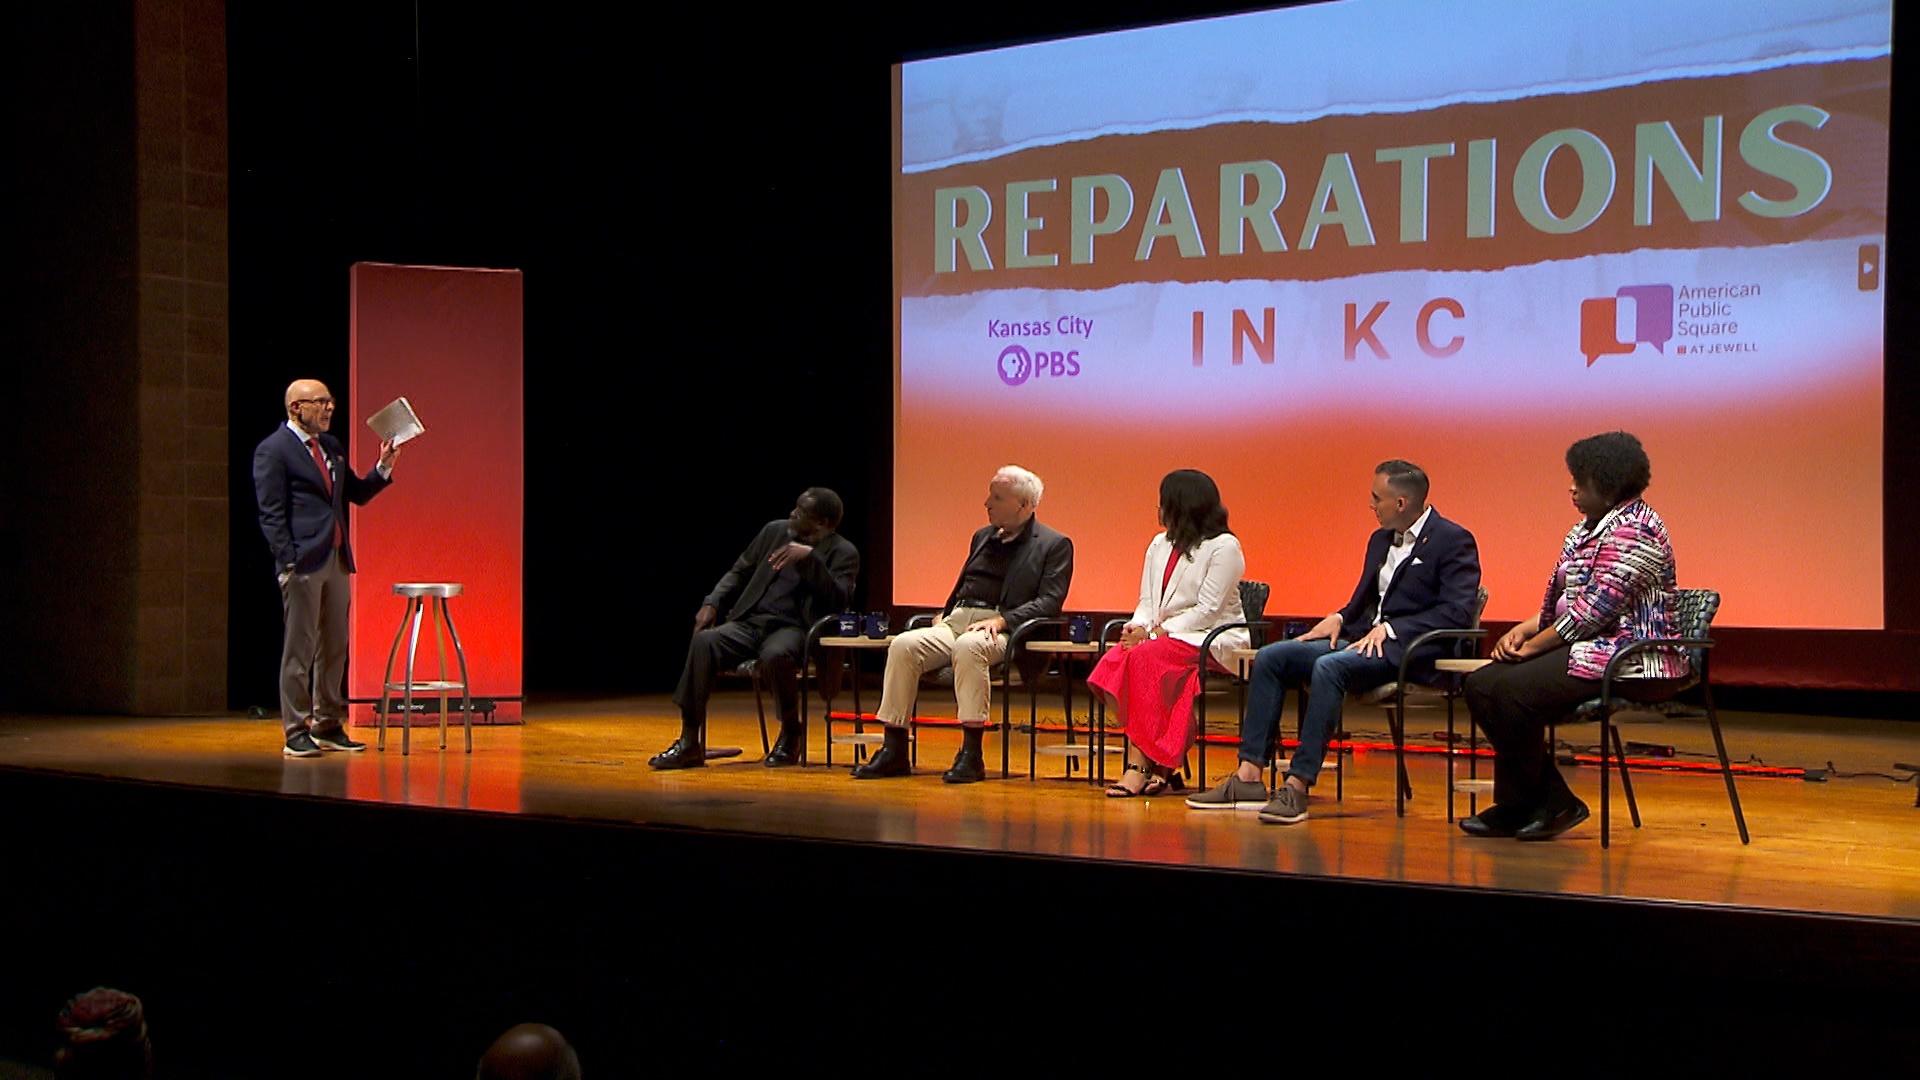 Reparations in KC